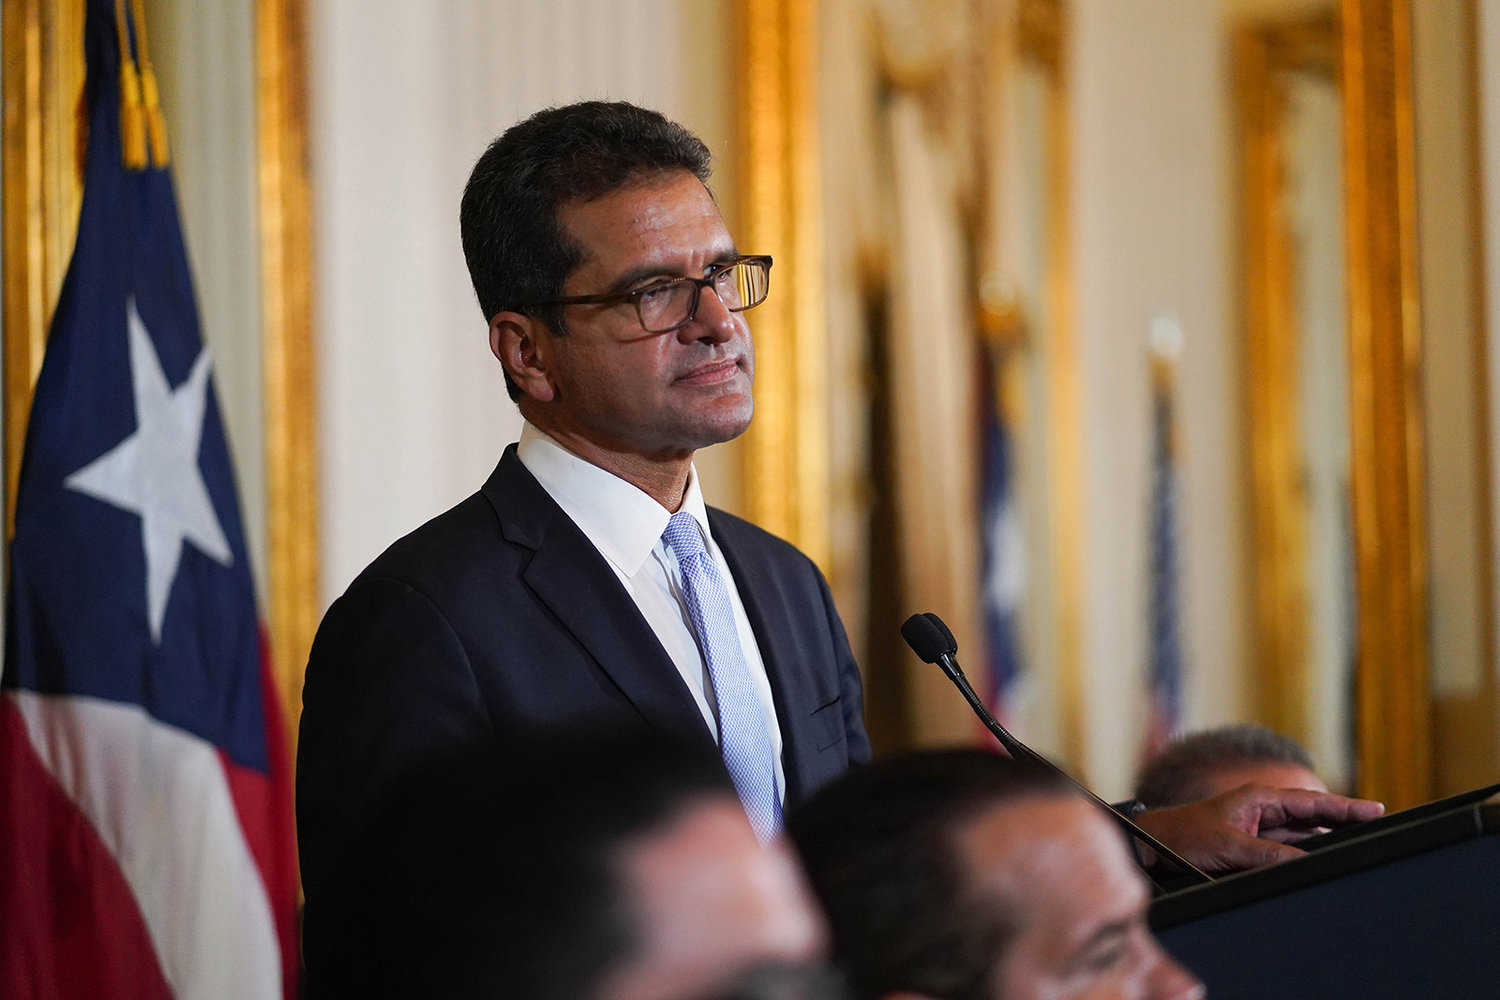 Puerto Rico Gov. Pedro Pierluisi answers questions during a news conference in 2019 in San Juan, Puerto Rico. (Angel Valentin/Getty Images/TNS)